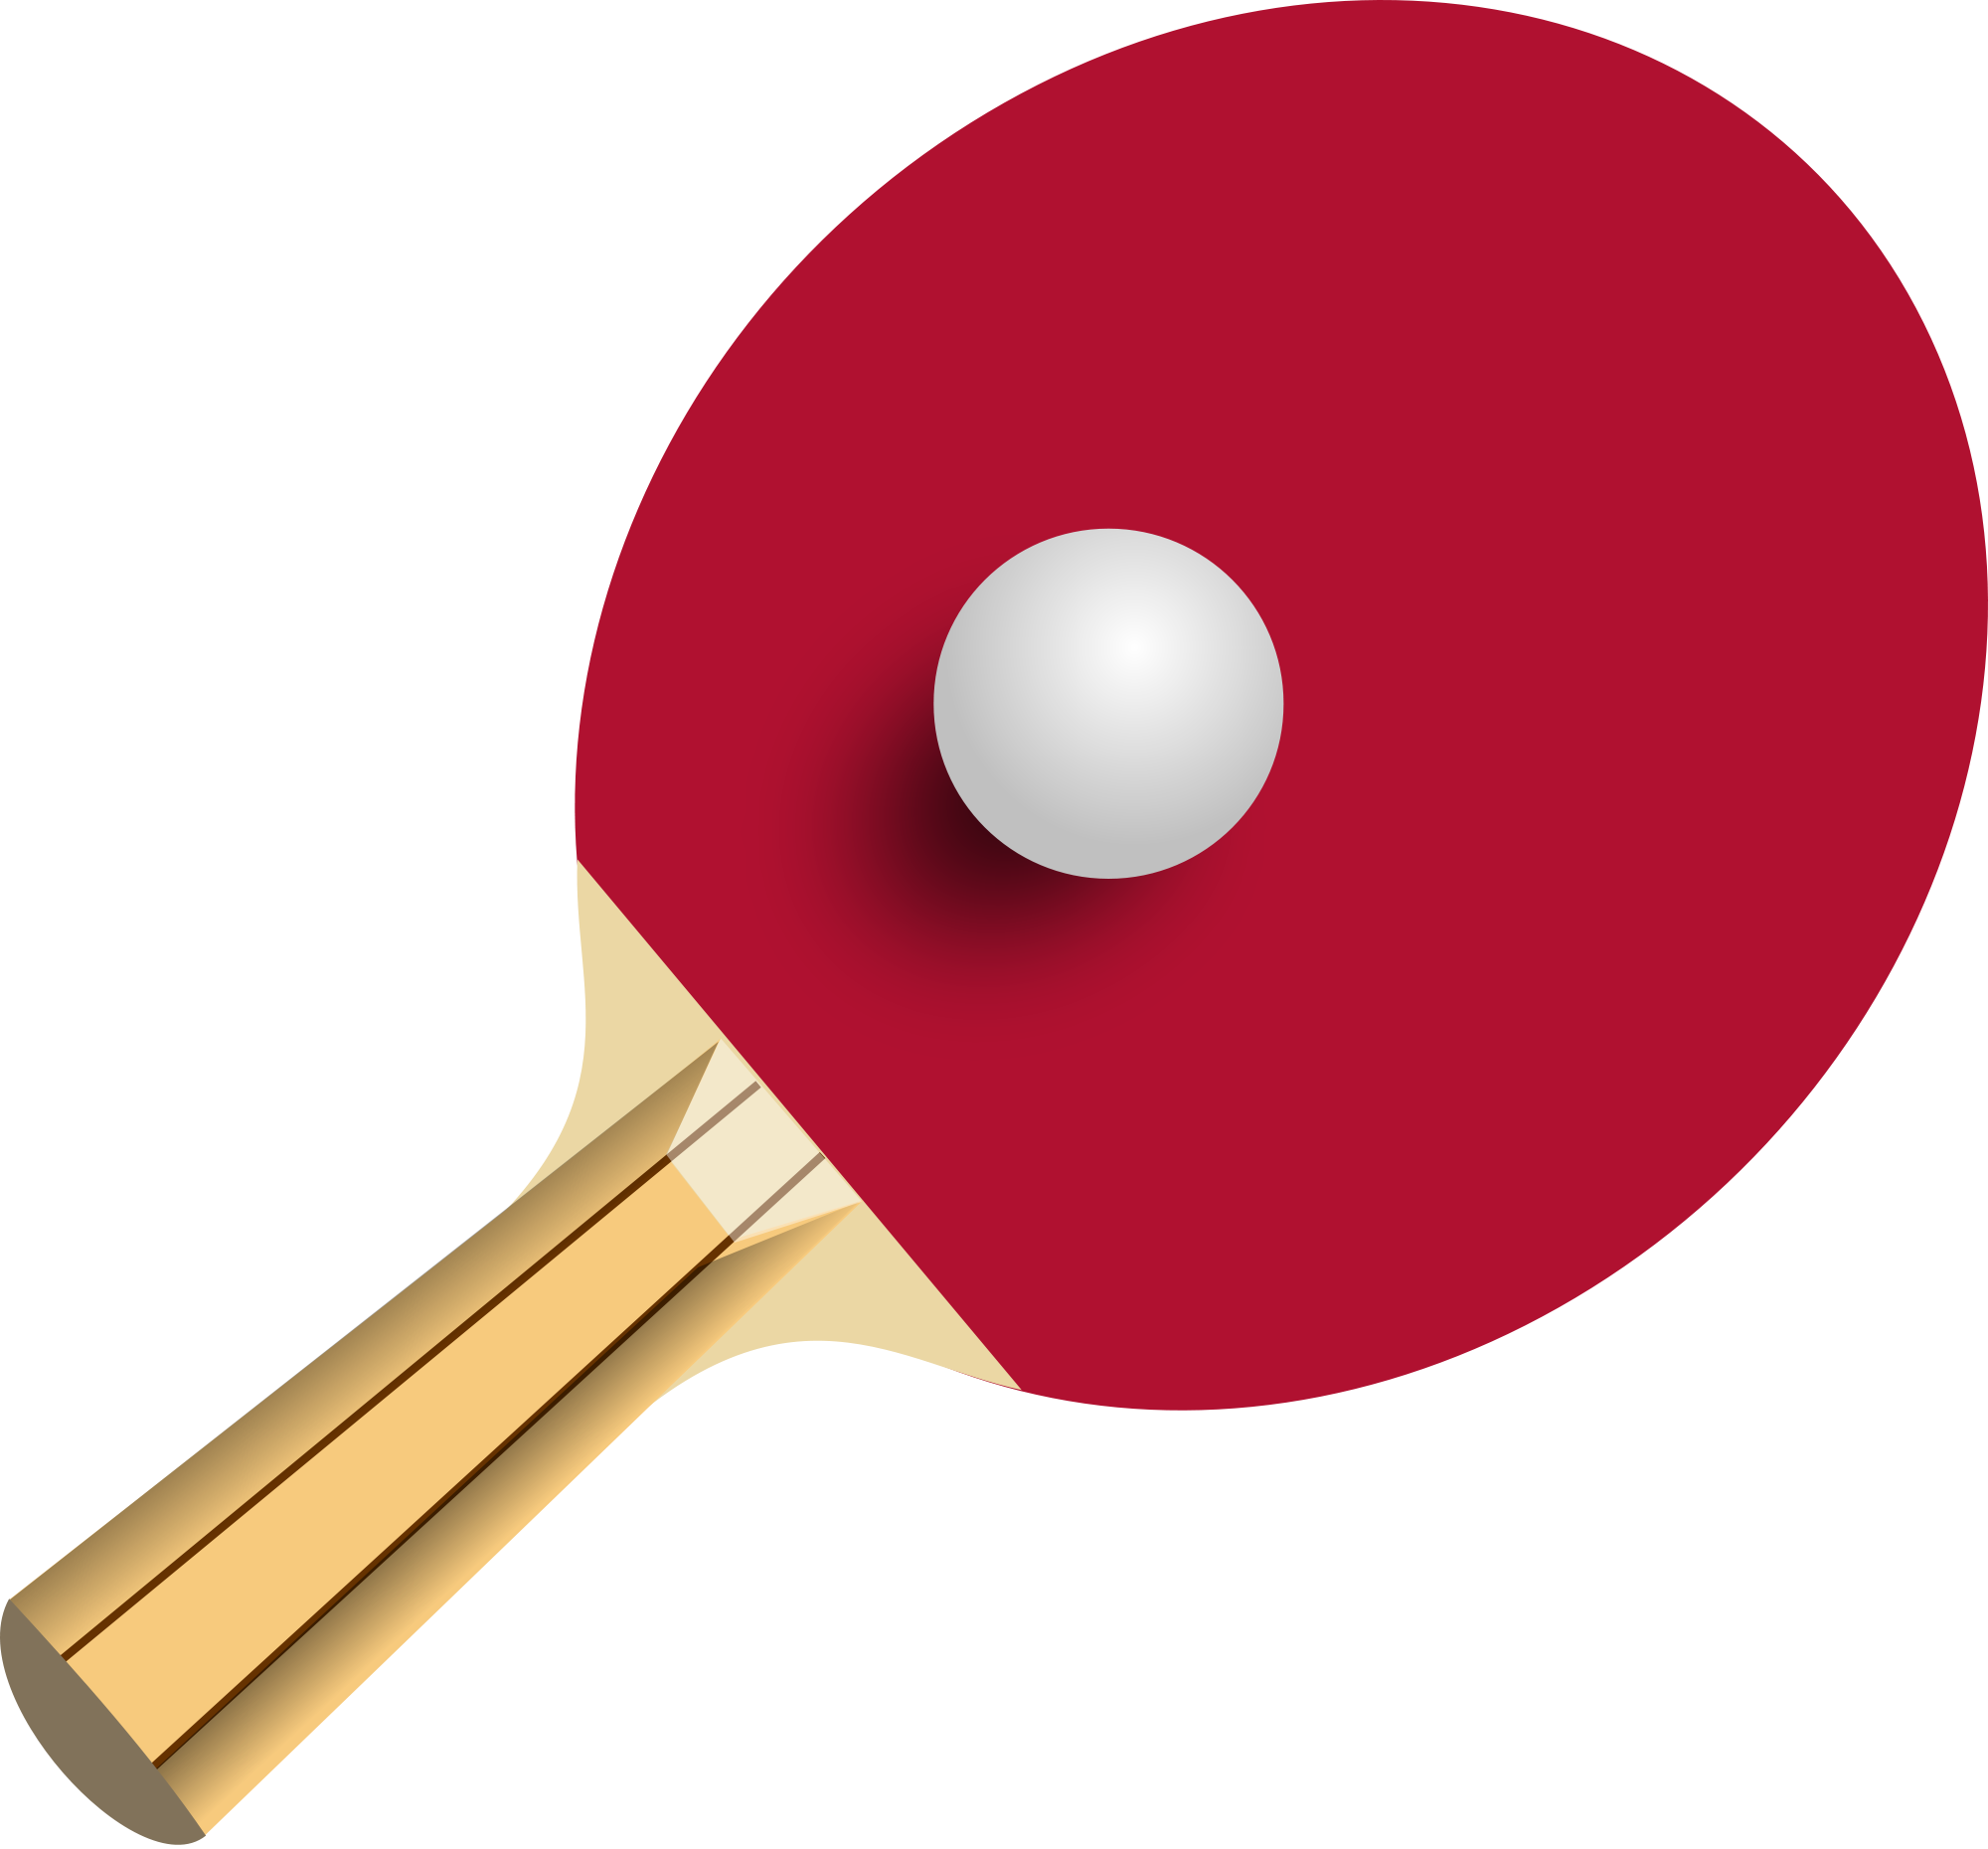 Interest responsibility Predict Free Ping Pong PNG Transparent Images, Download Free Ping Pong PNG  Transparent Images png images, Free ClipArts on Clipart Library